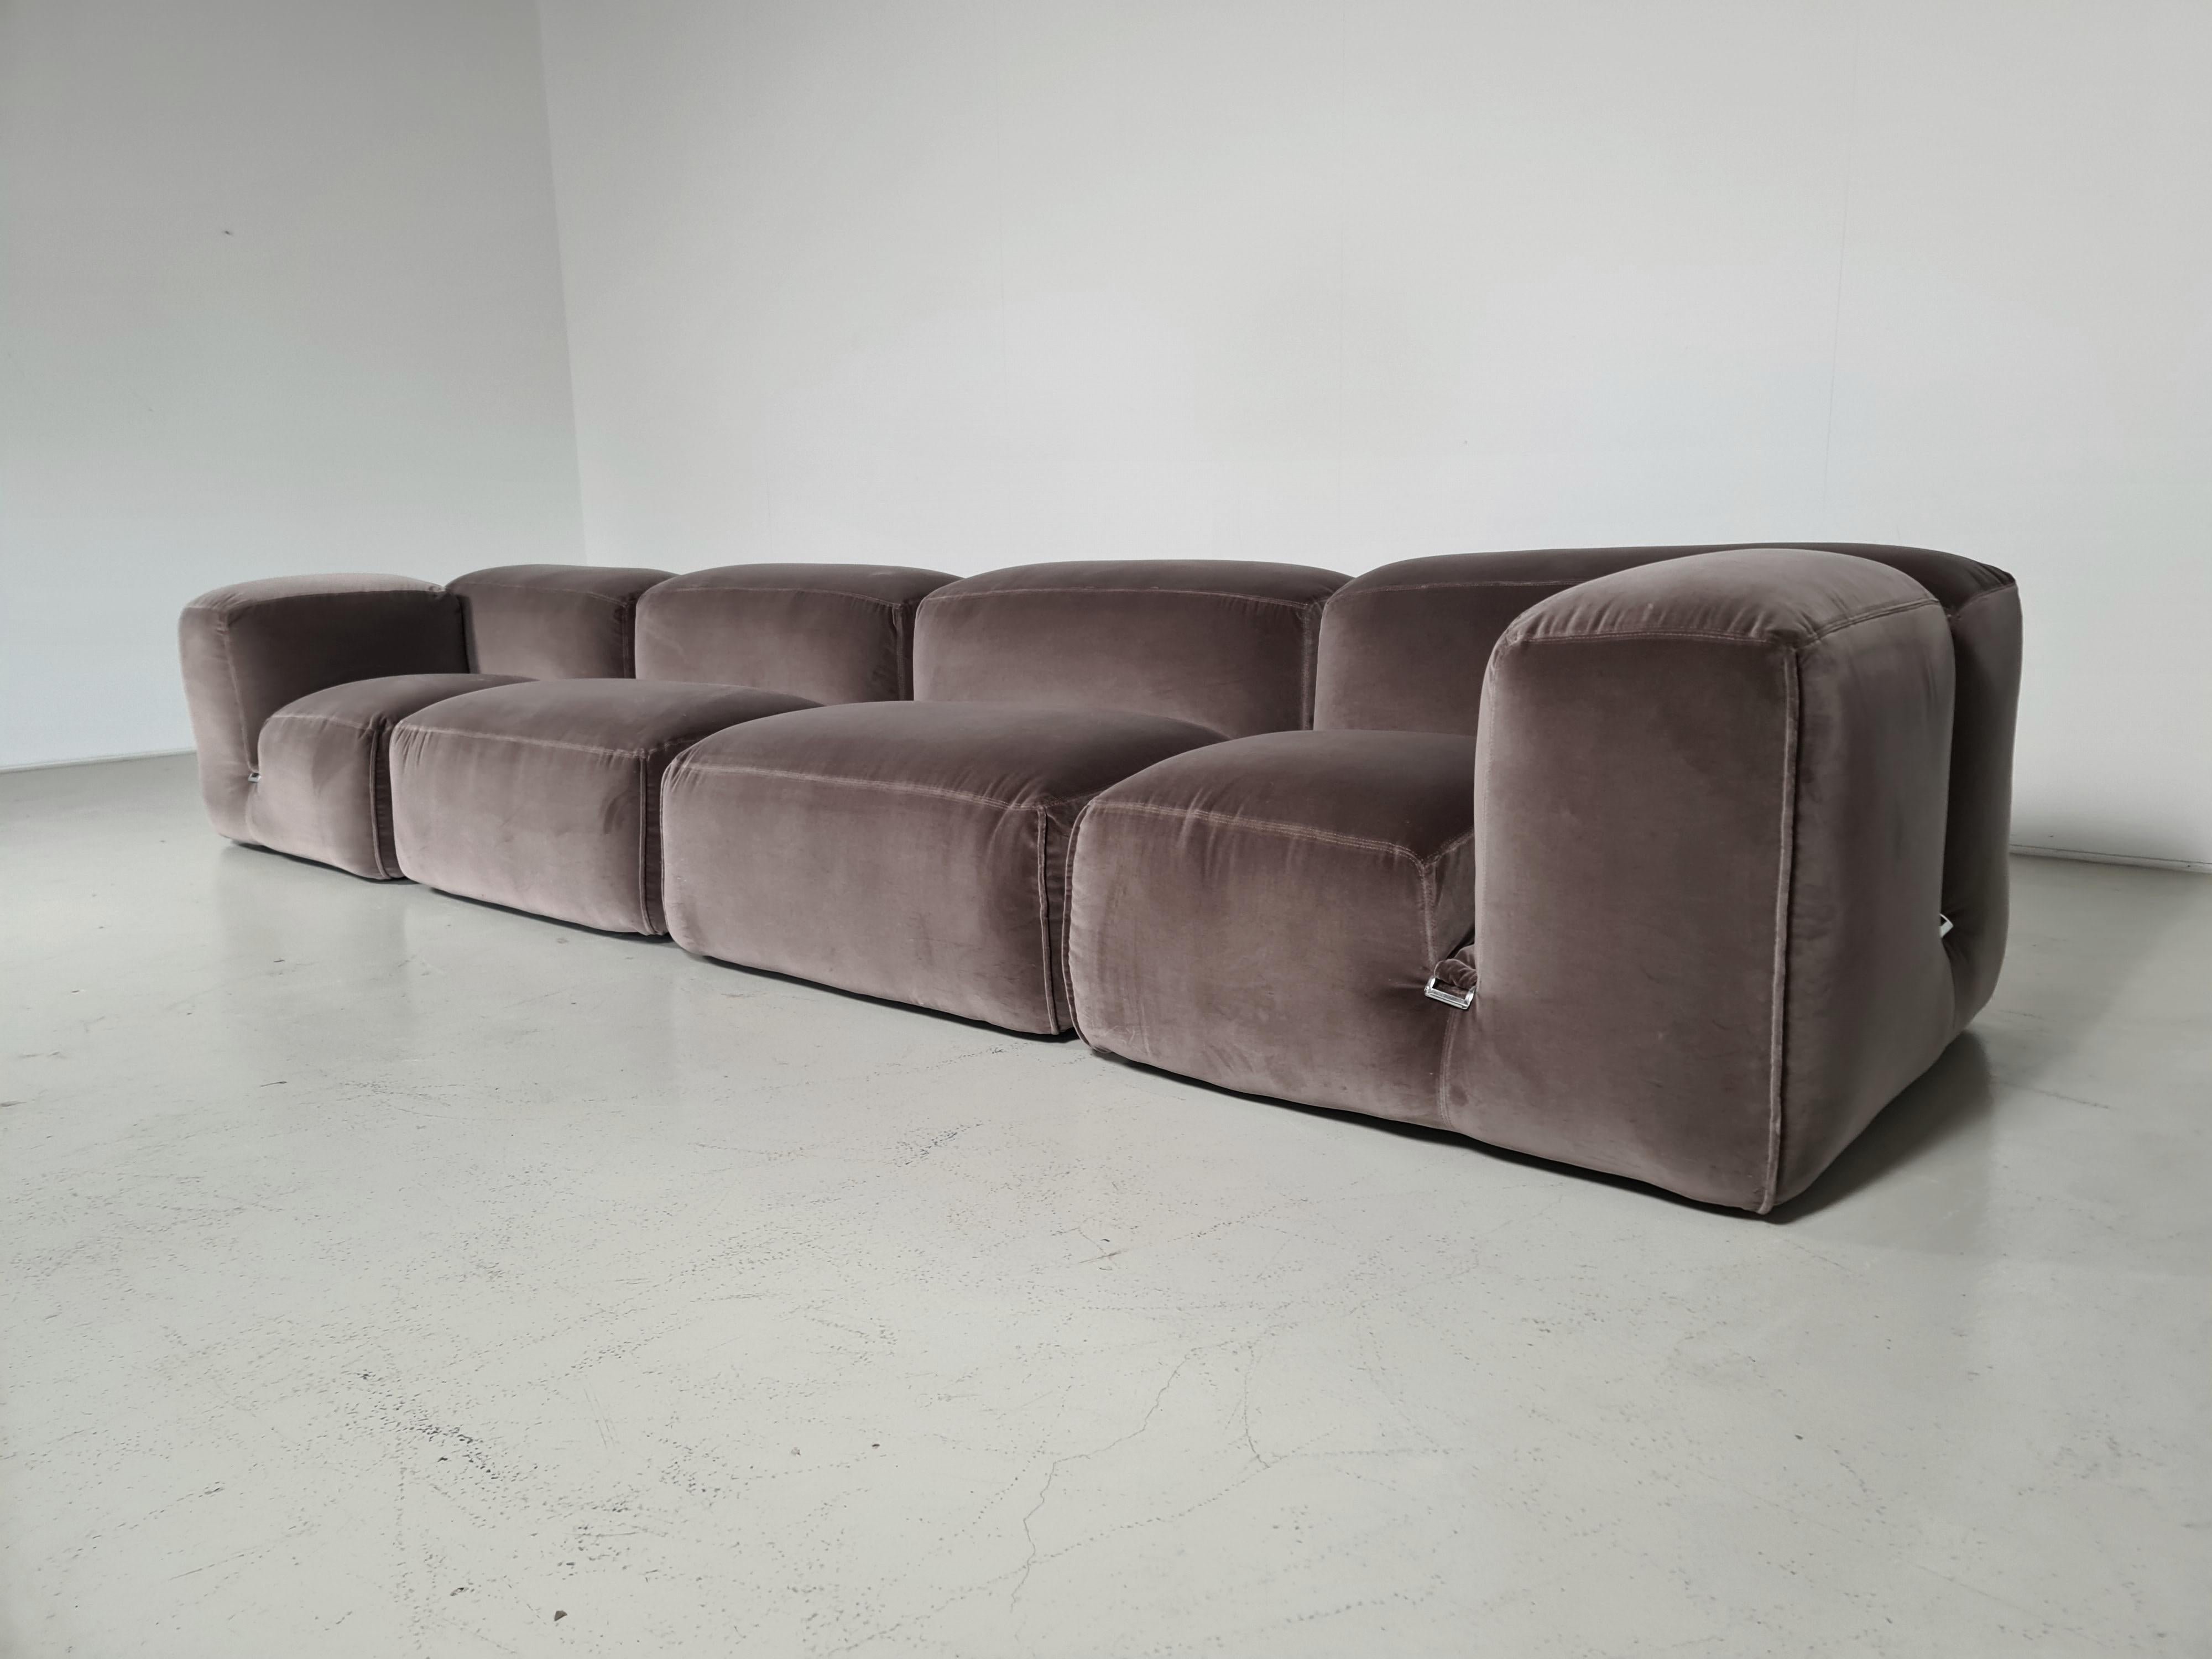 Exceptional and rare 4-piece sectional Le Mura sofa by Mario Bellini for Cassina, Italy, 1970s. The sofa is reupholstered in a Dedar Milano cotton velvet fabric. The 4 sections hook into each other with chrome metal buckles. This sofa was just for a